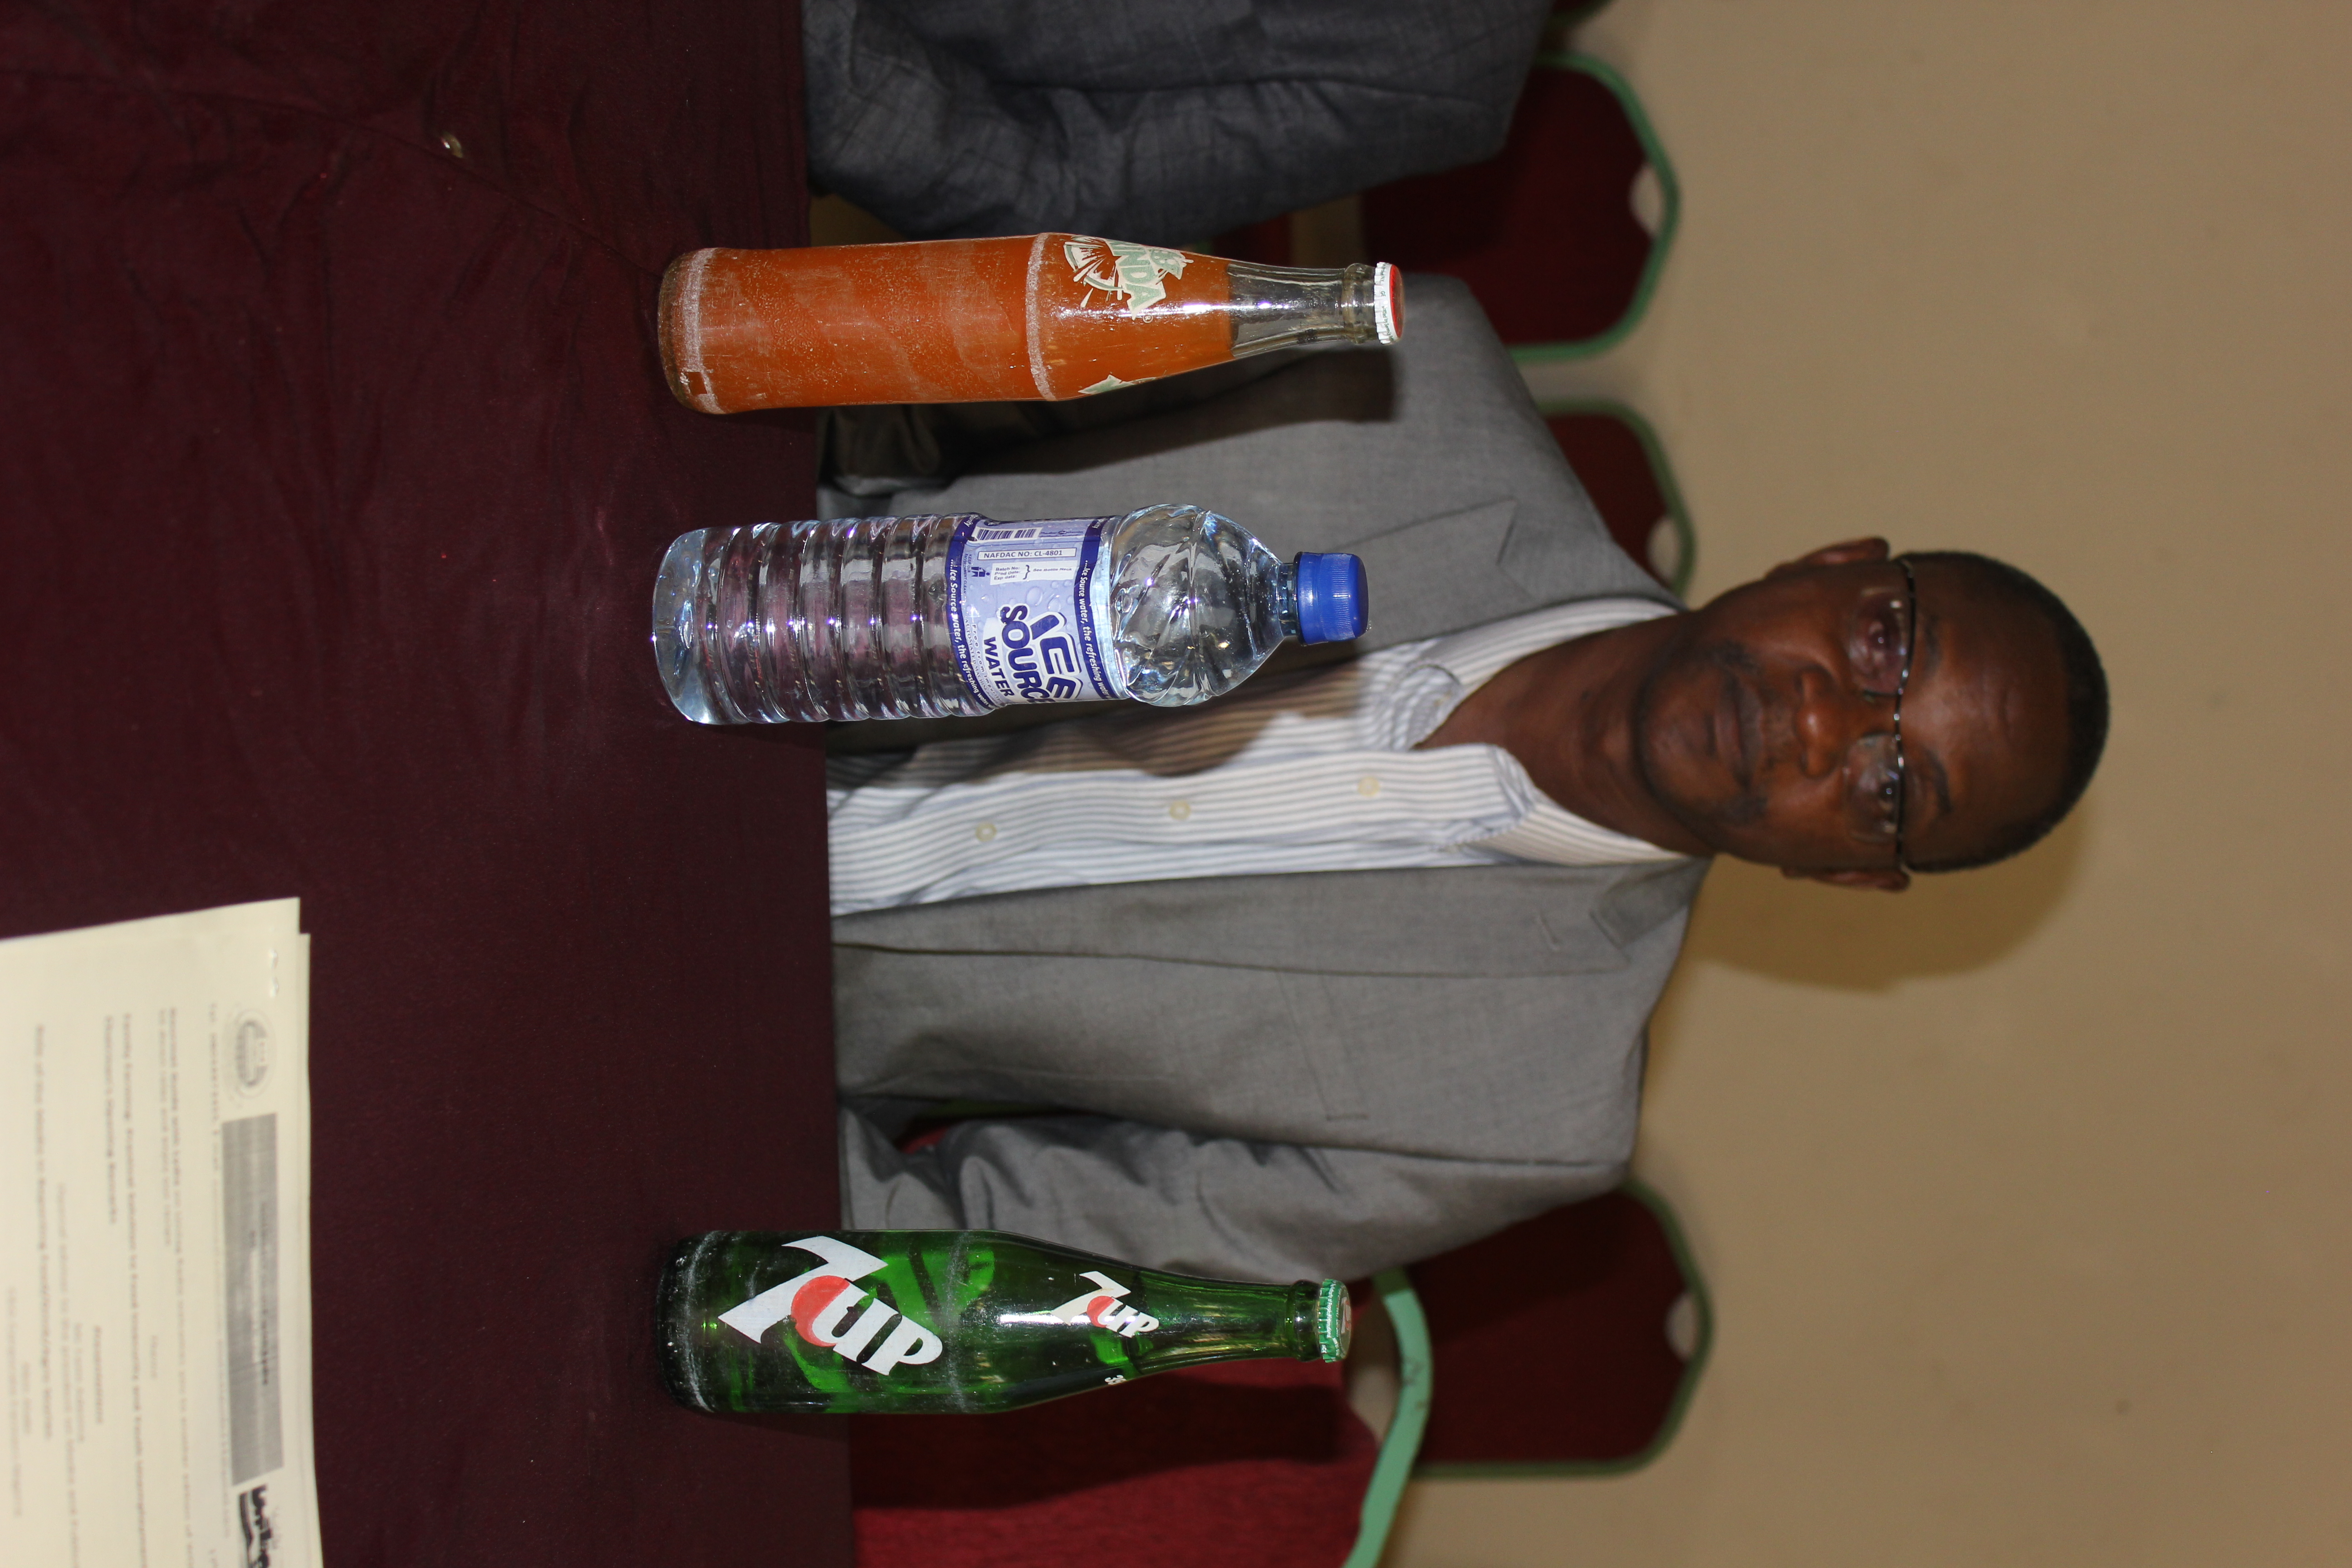 Former Head of Department  and lecturer History Deptartment University of Lagos, Proffesor Taiwo Akinyele